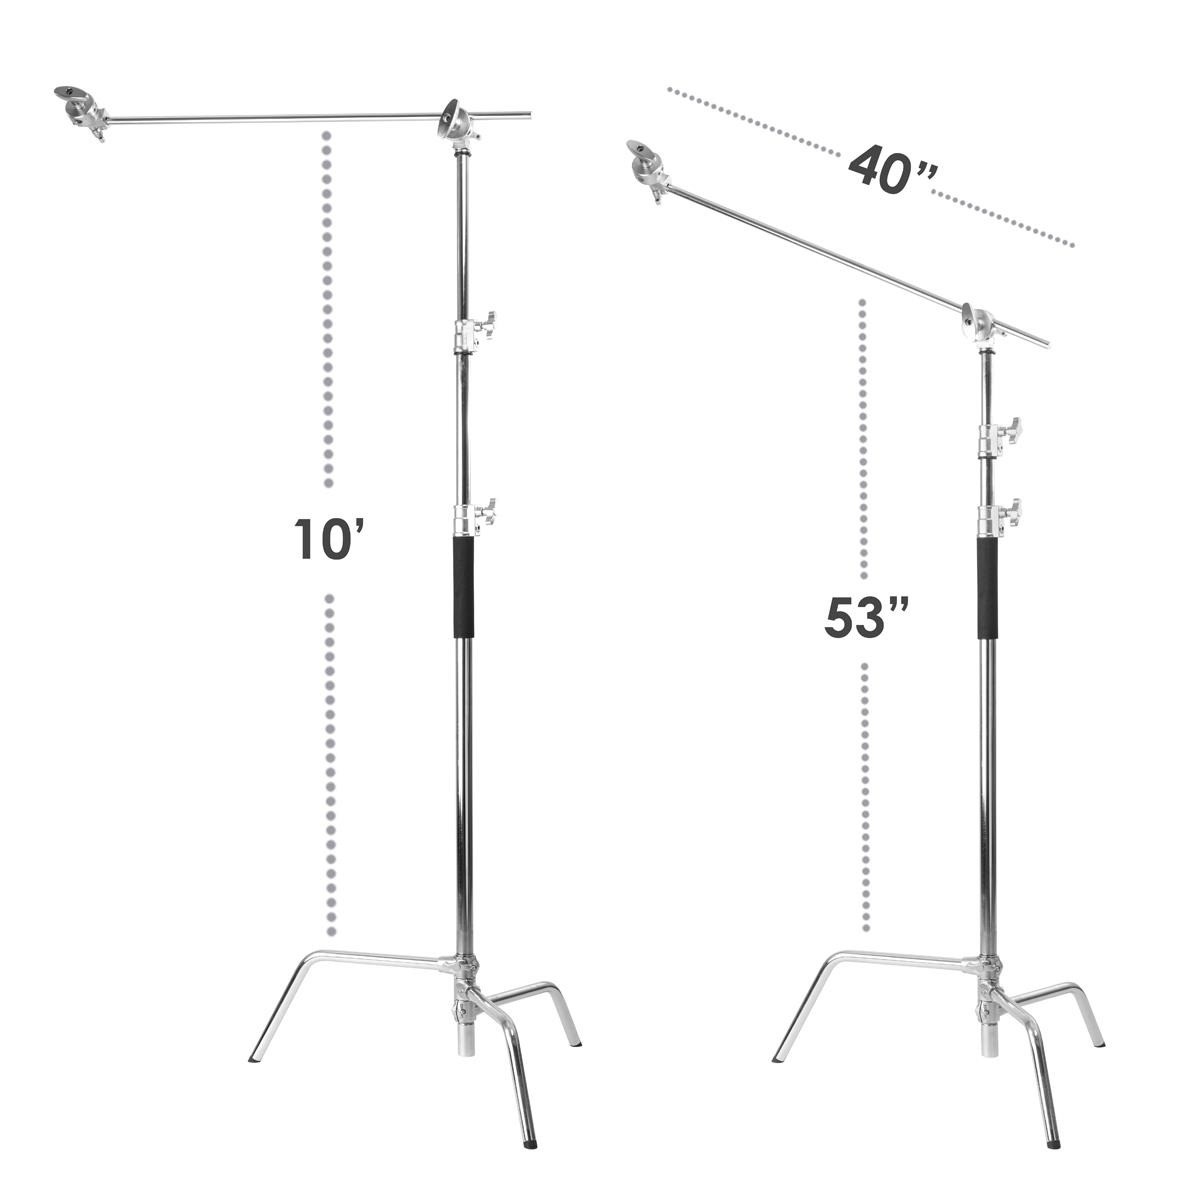 C Stand with Turtle Base - 10.5ft Steel